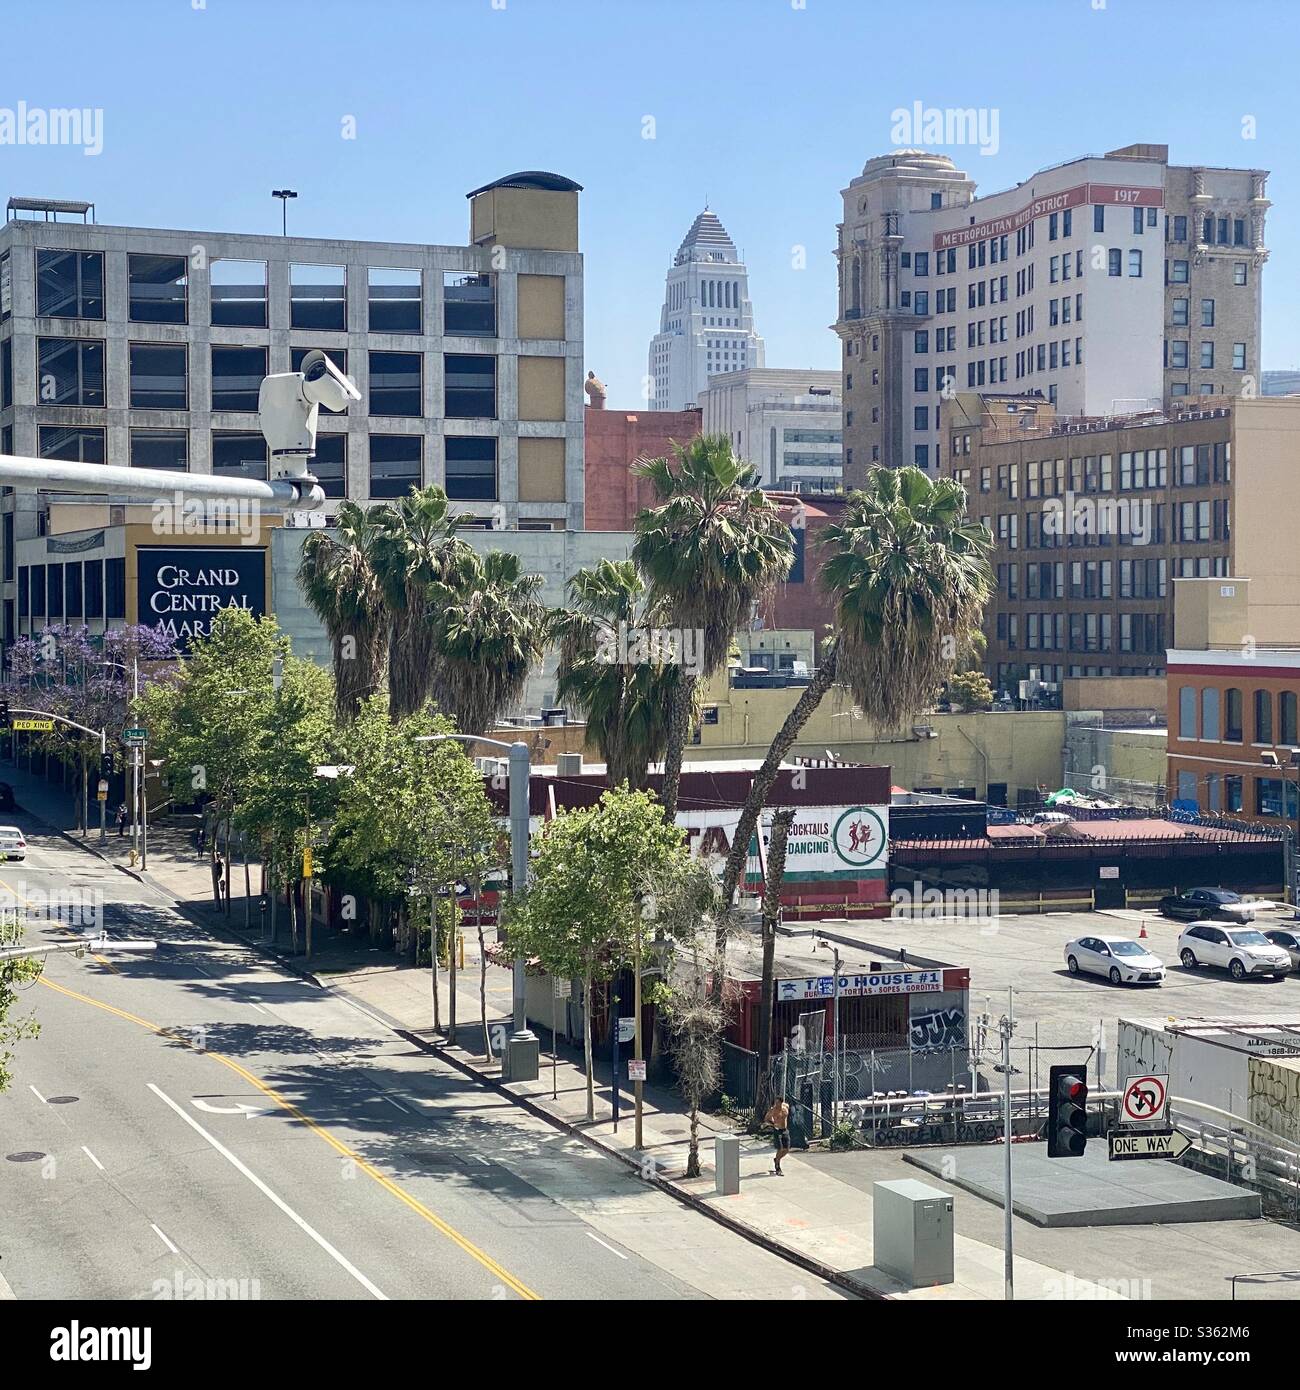 LOS ANGELES, CA, APR 2020: Downtown view looking past Grand Central Market towards City Hall, security camera on pole in foreground Stock Photo